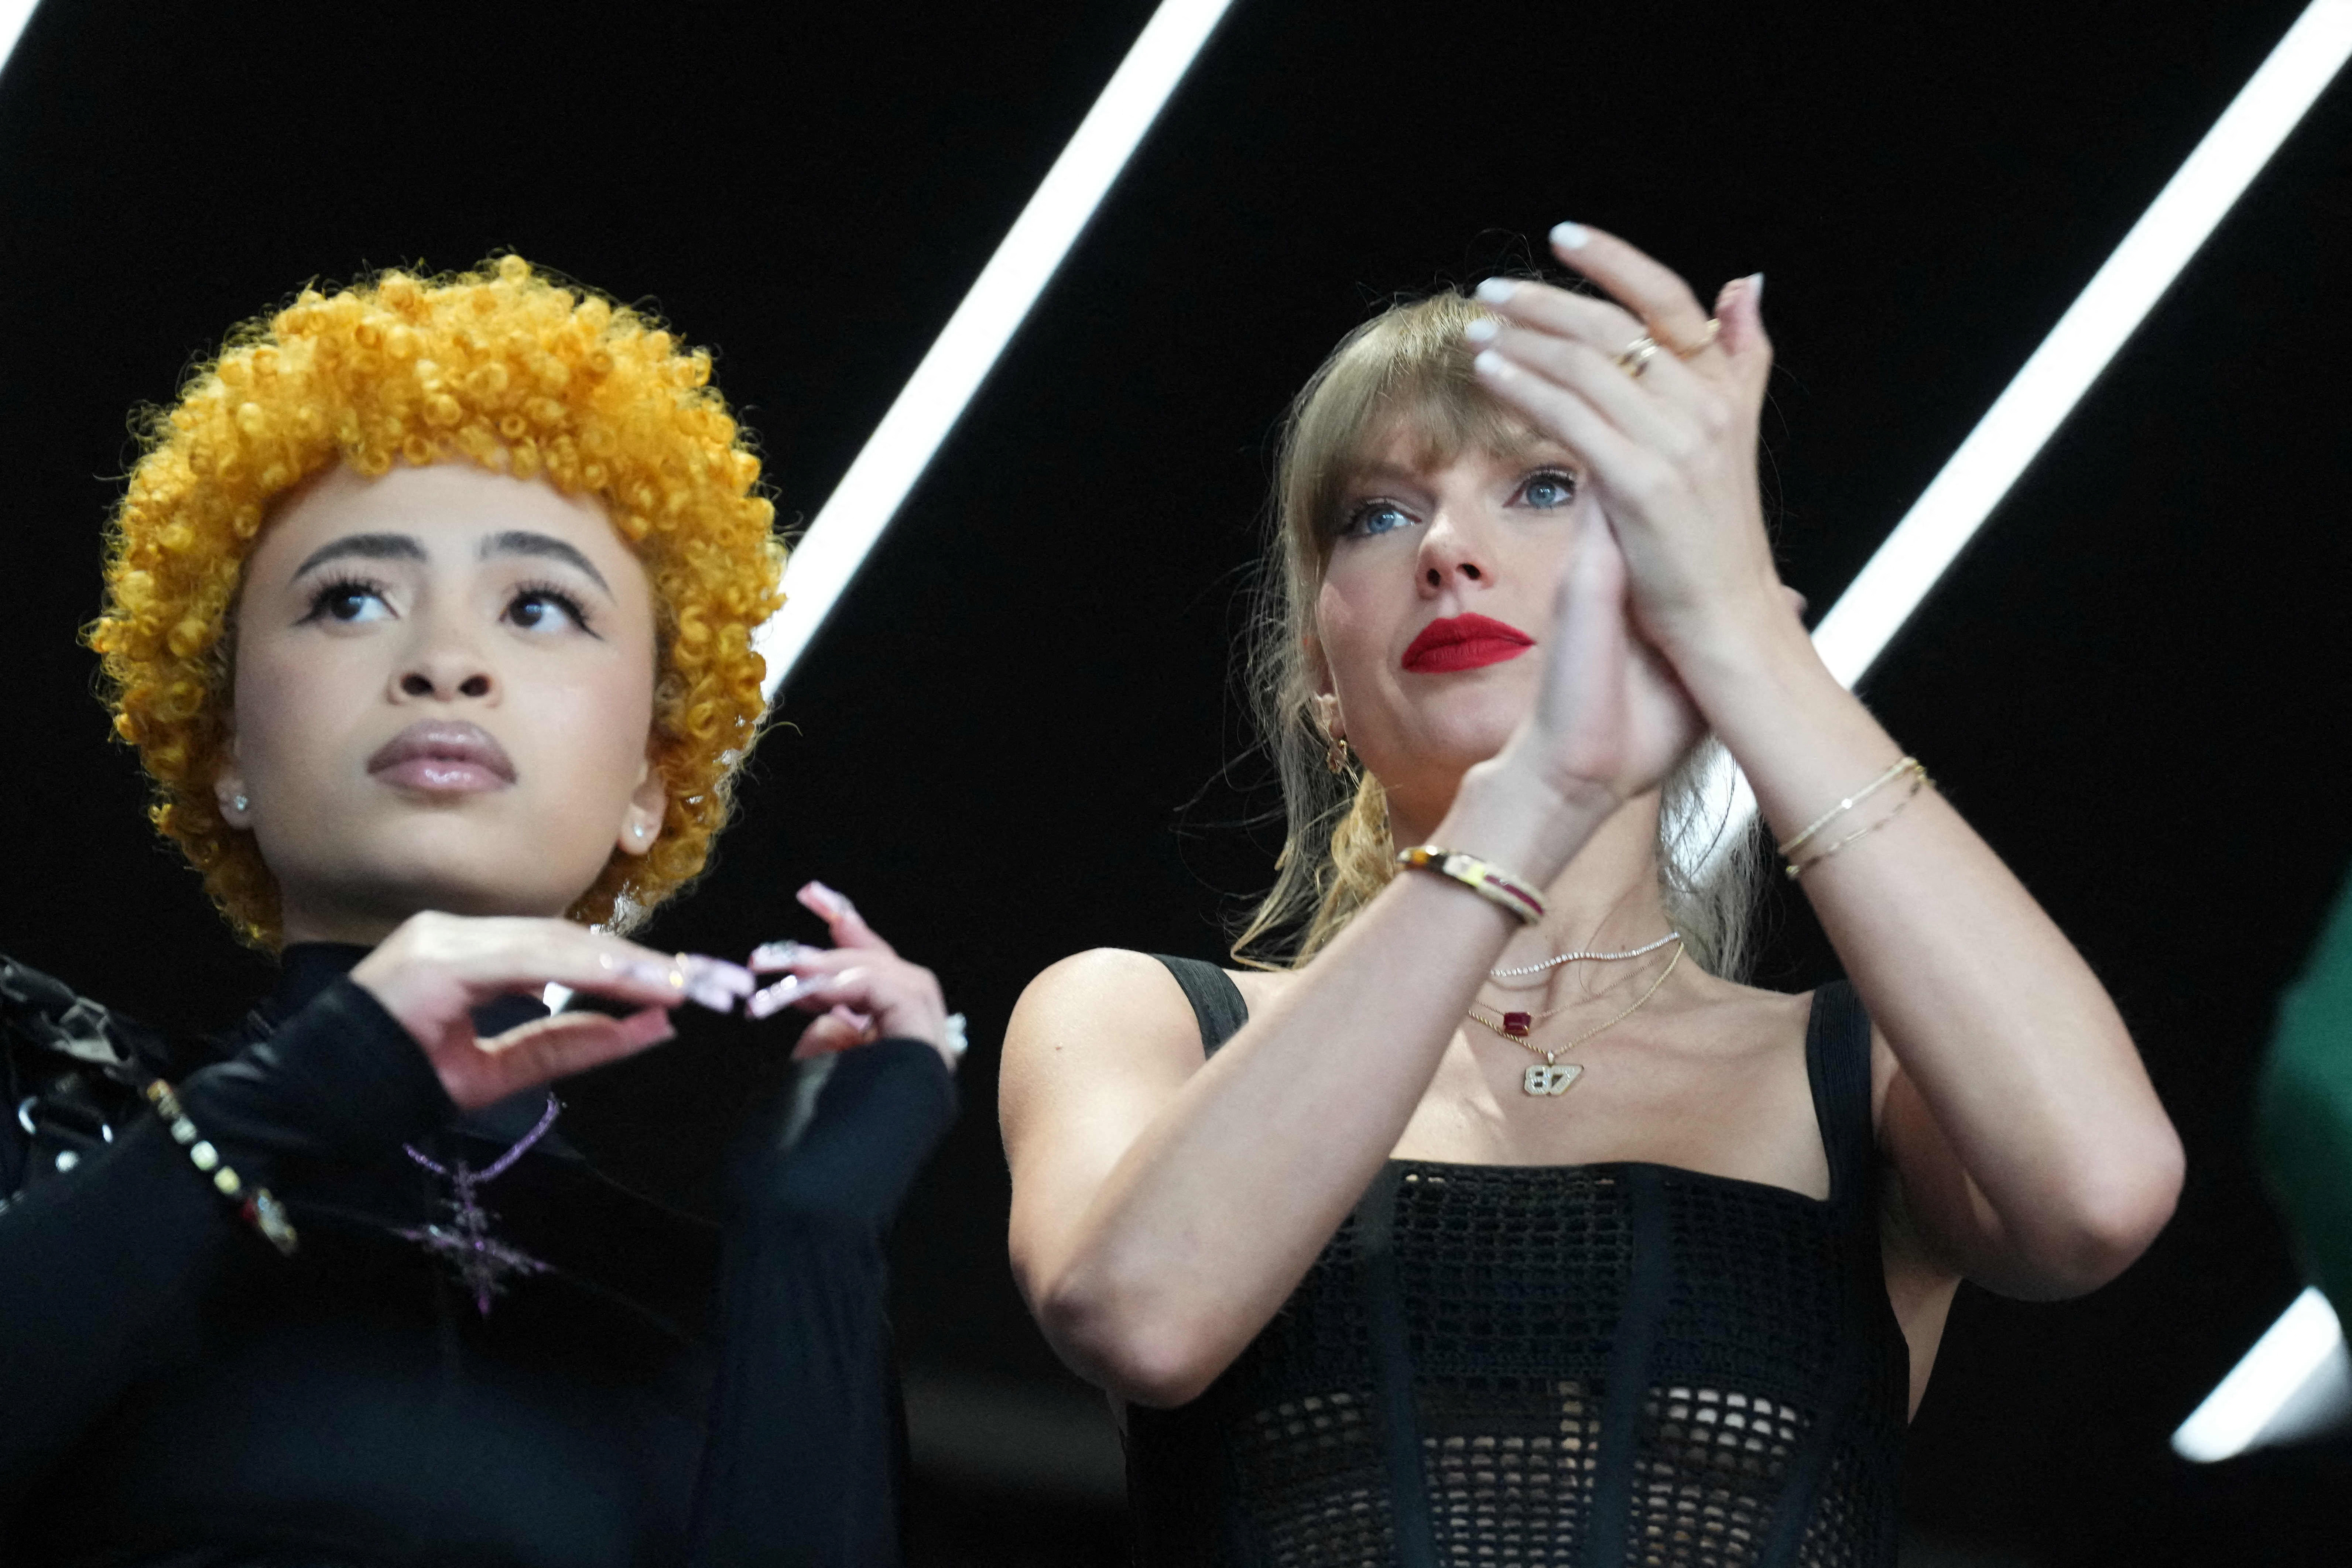 Taylor Swift's fans noted that Ice Spice accessorized with an upside-down cross necklace